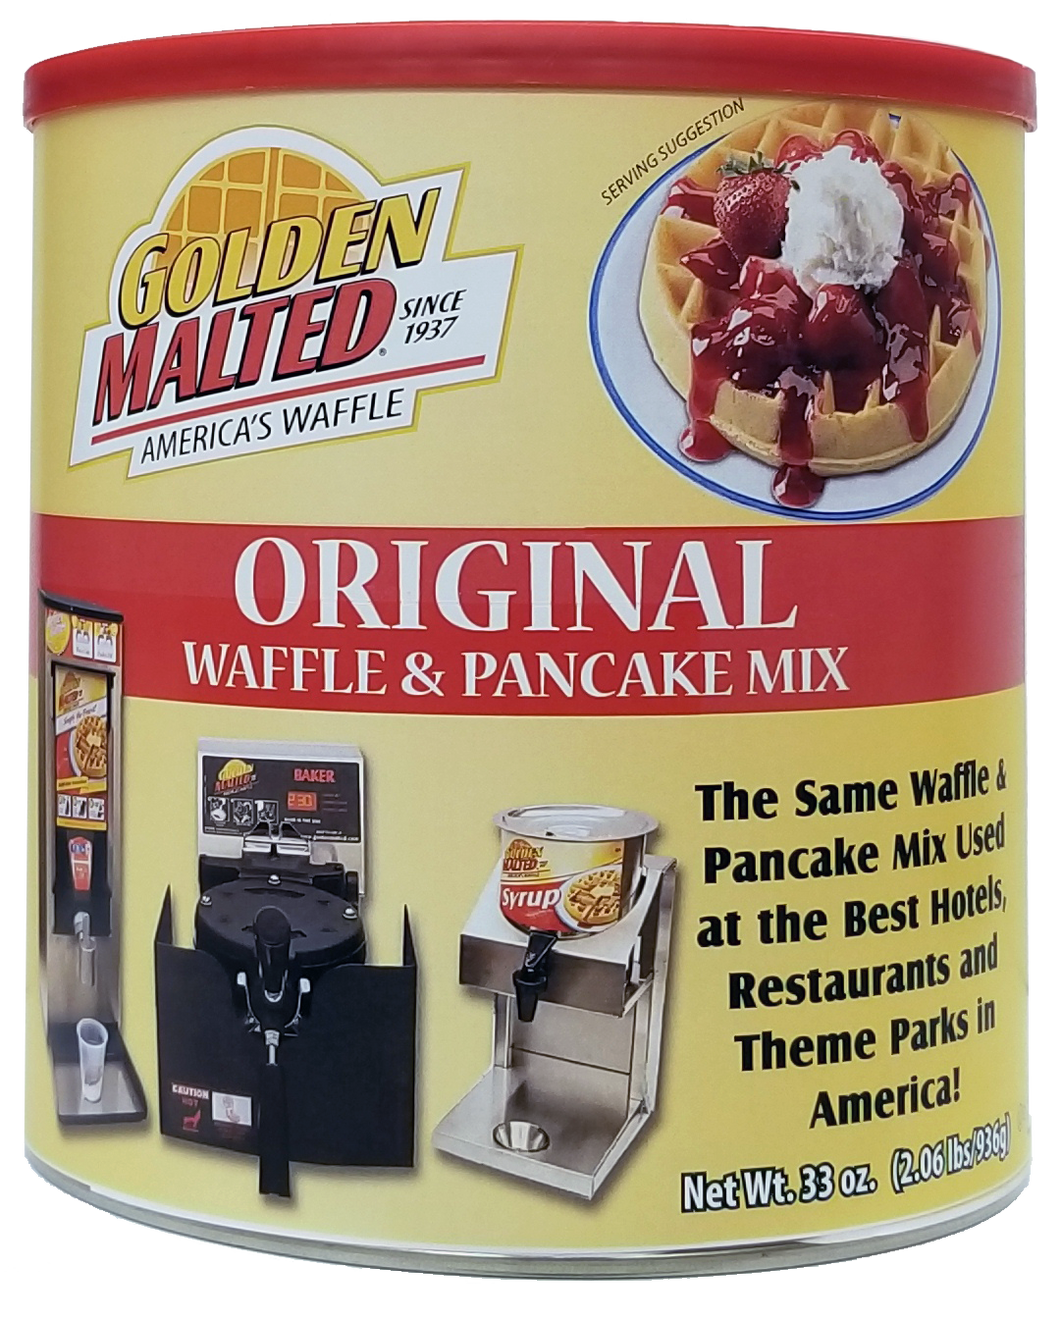 Carbon's Golden Malted Waffle and Pancake Mix